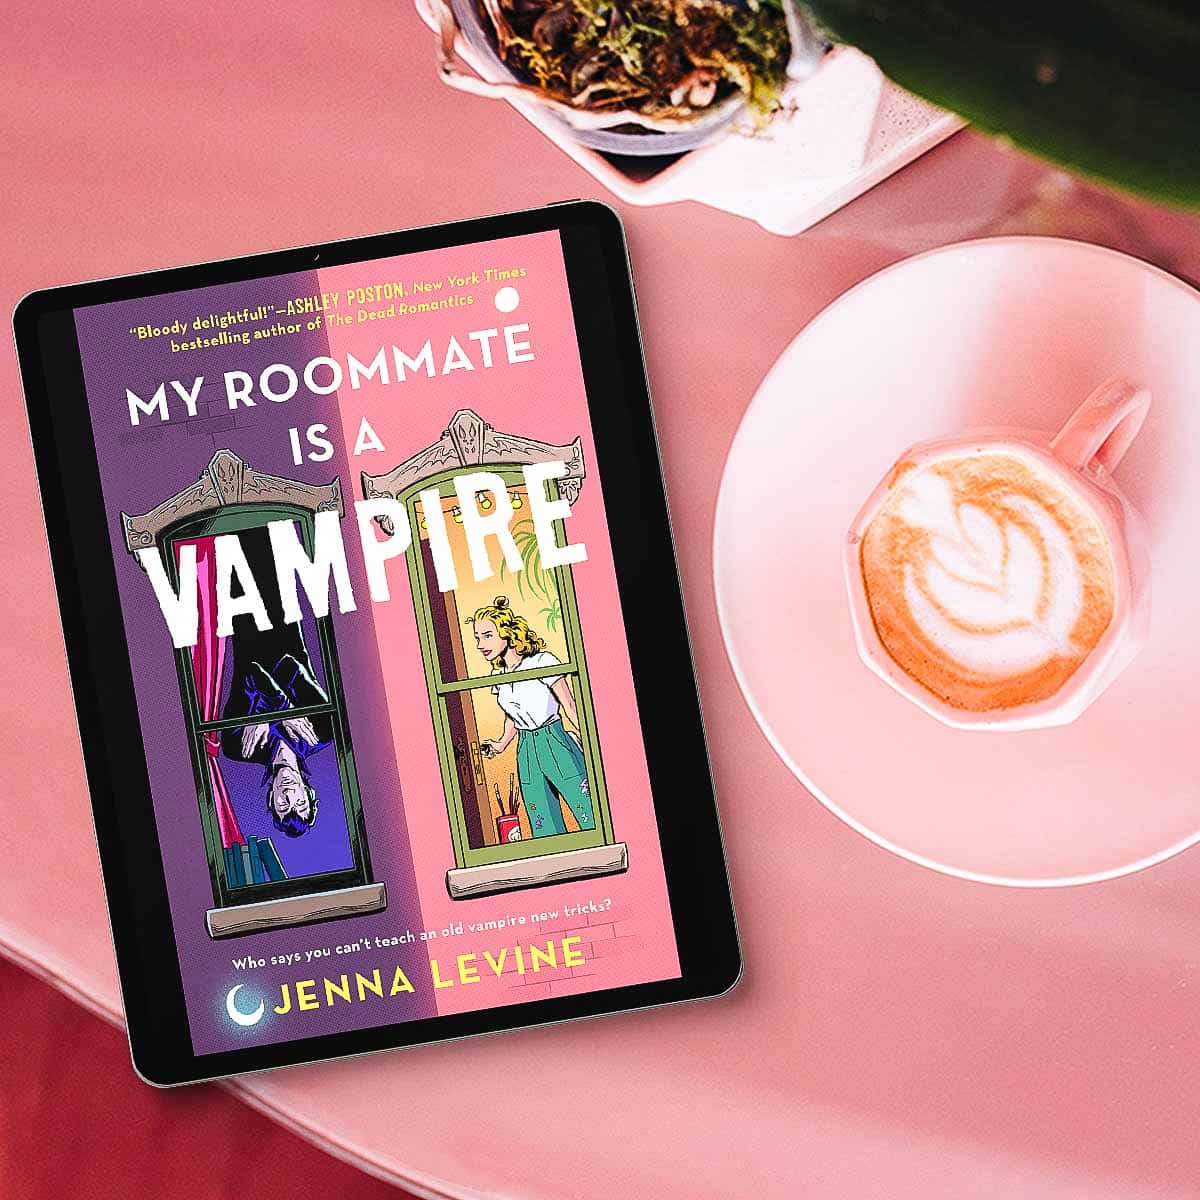 My Roommate is a Vampire by Jenna Levine-featured